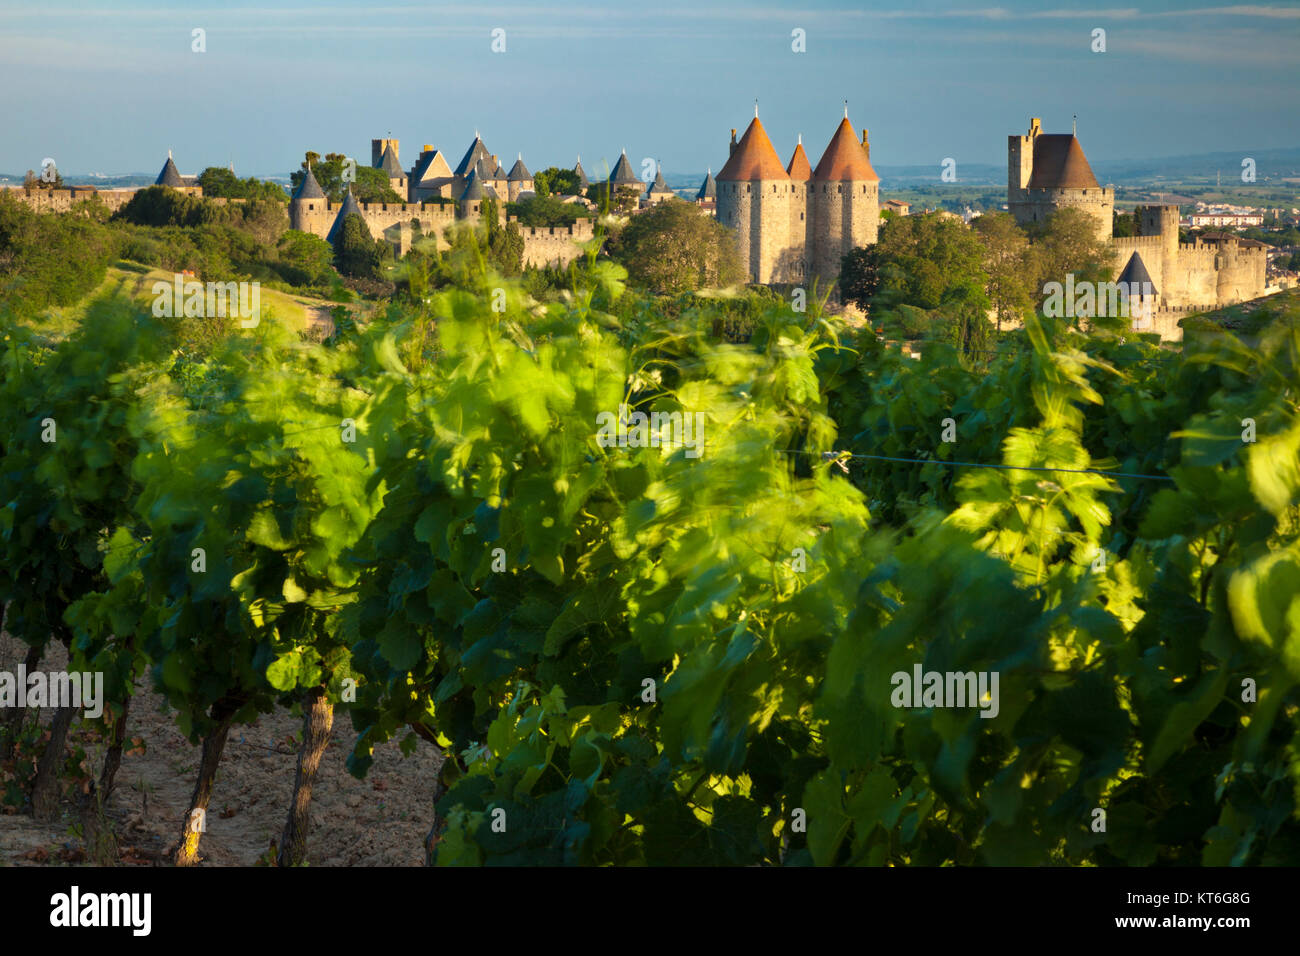 Blowing grape vines in early morning with the medieval town of Carcassonne beyond, Occitanie, France Stock Photo